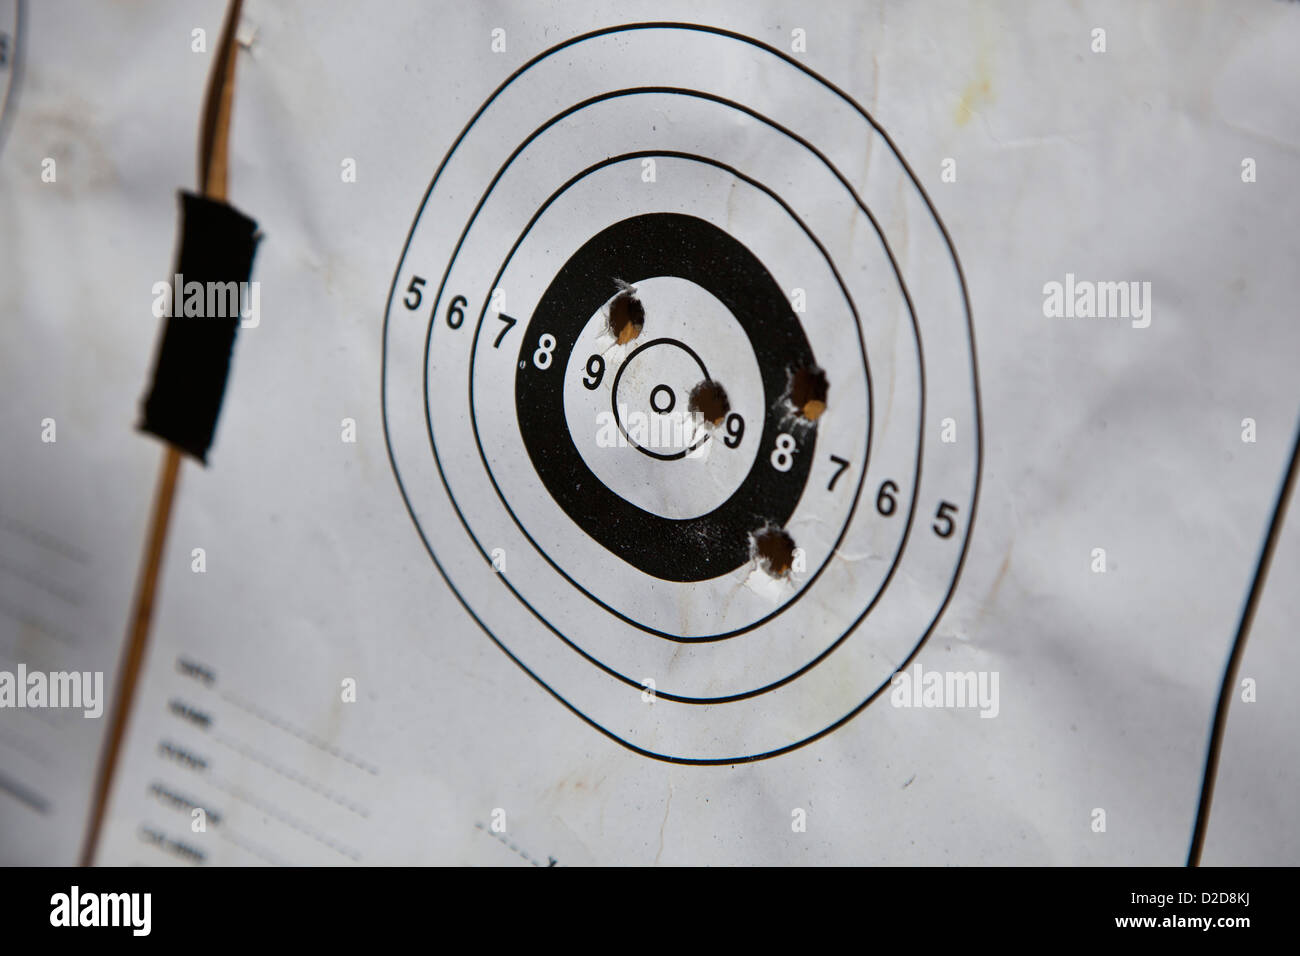 Bullet holes on a paper target Stock Photo